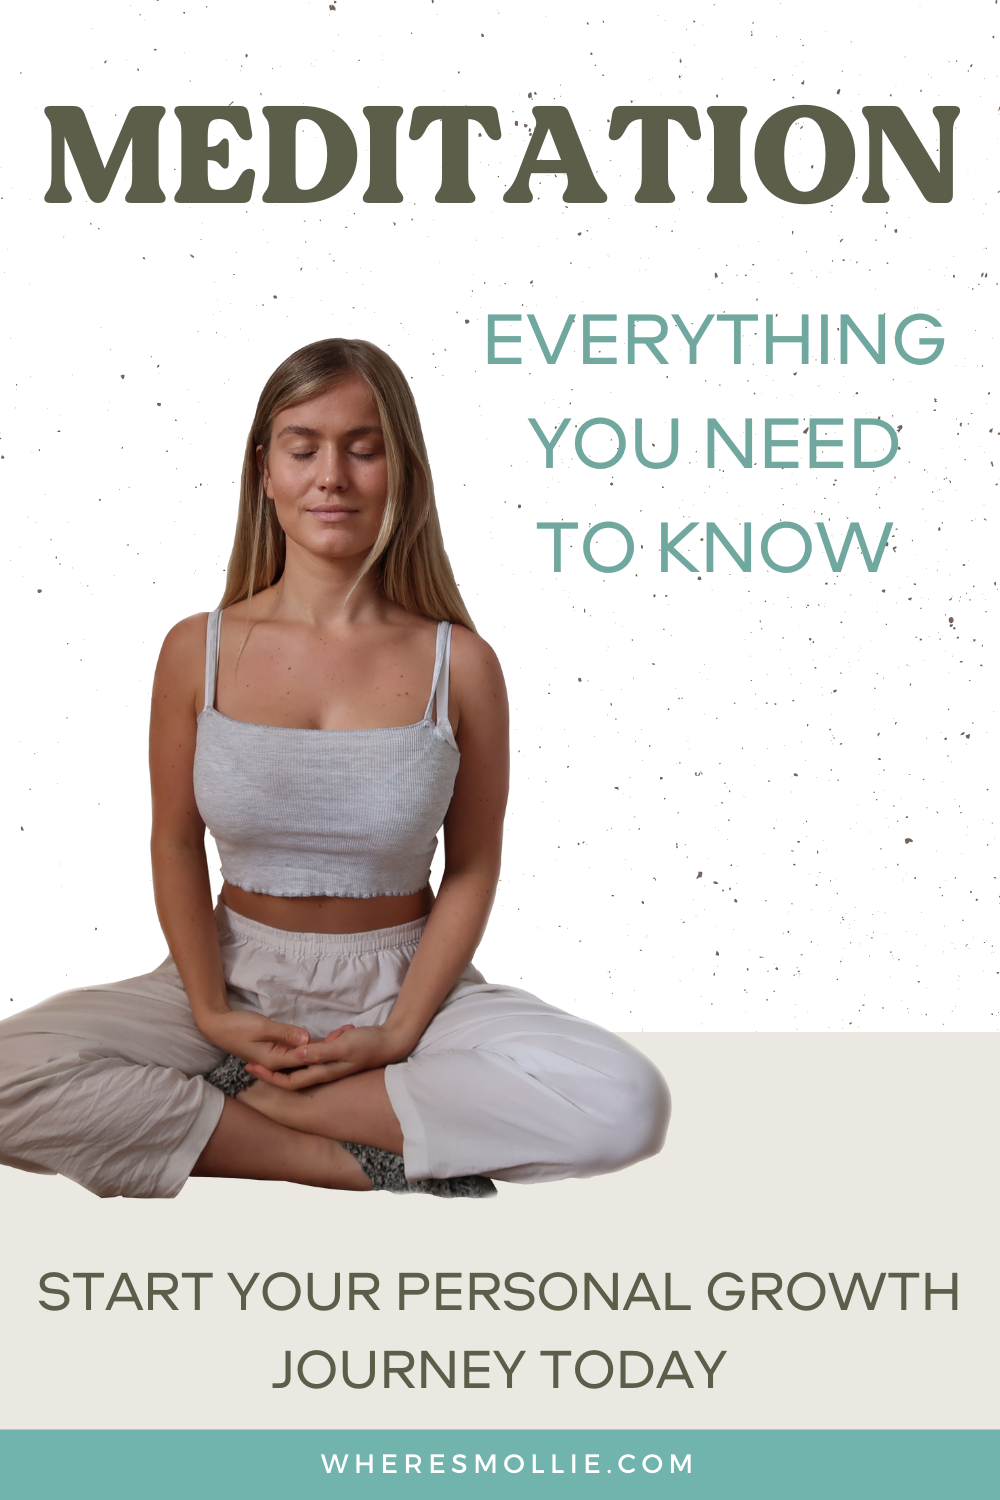 A meditation guide for beginners